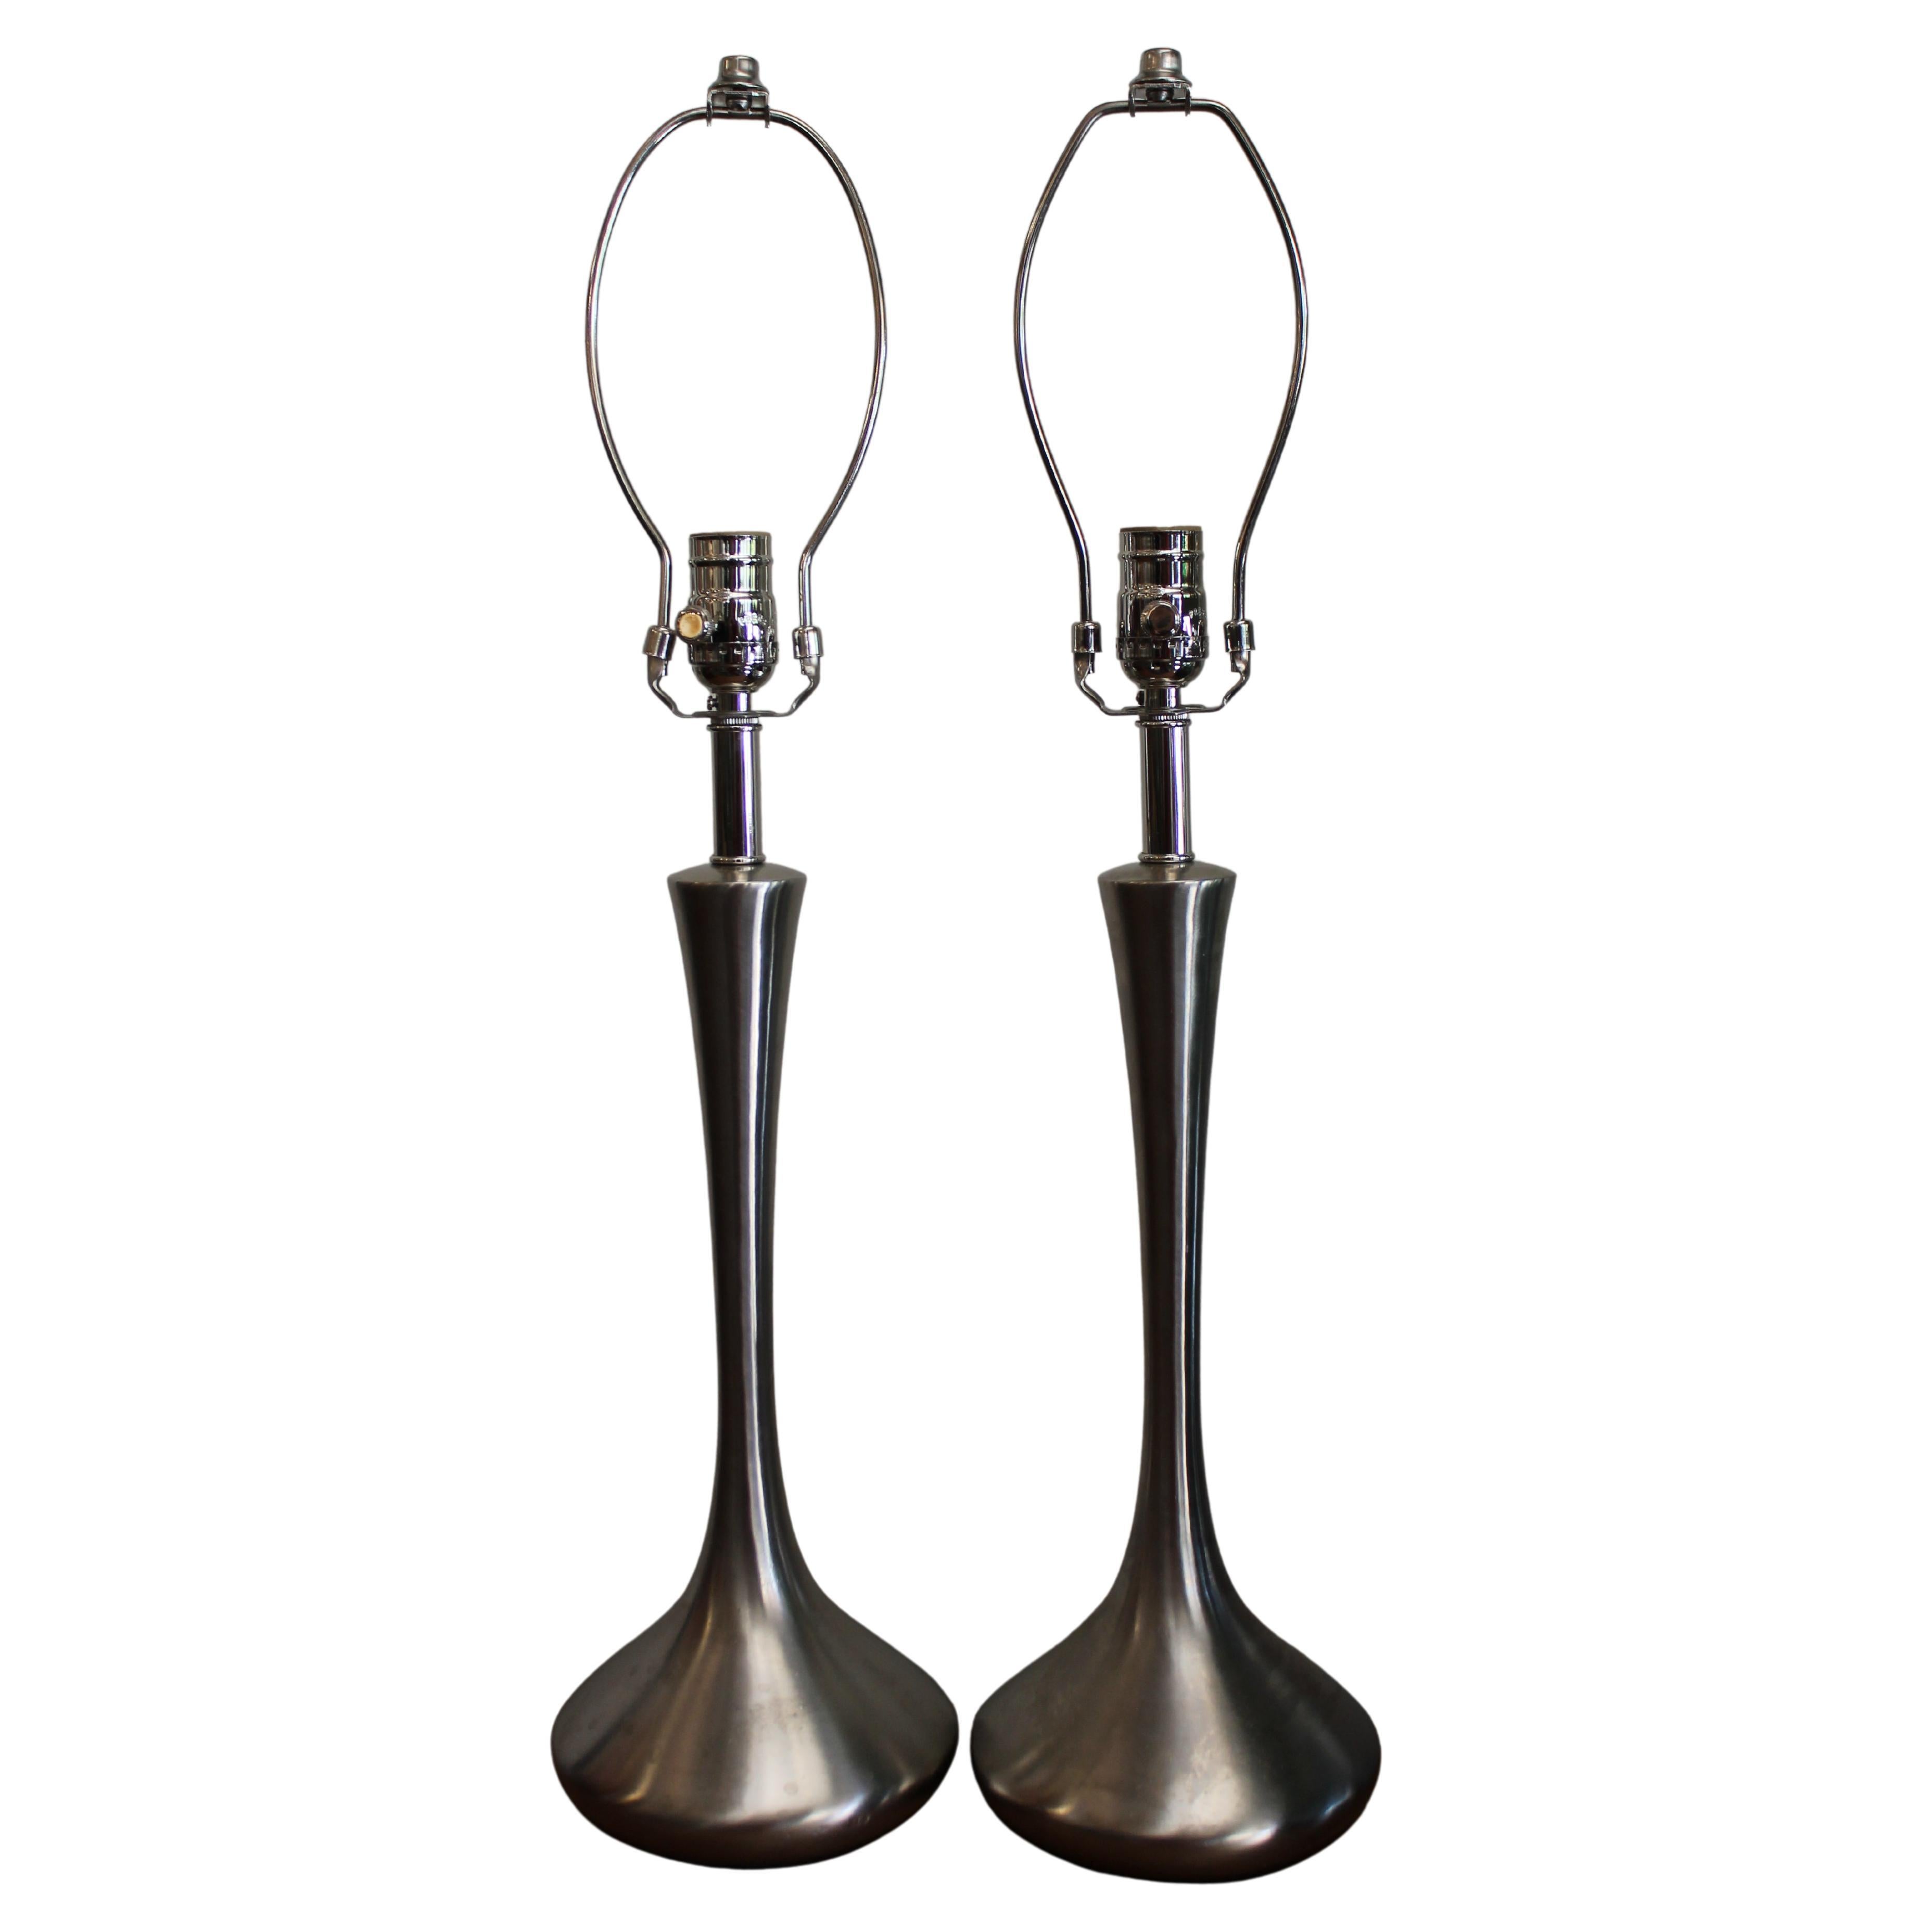 Pair of Brushed Chrome Lamps by the Laurel Lamp Co.